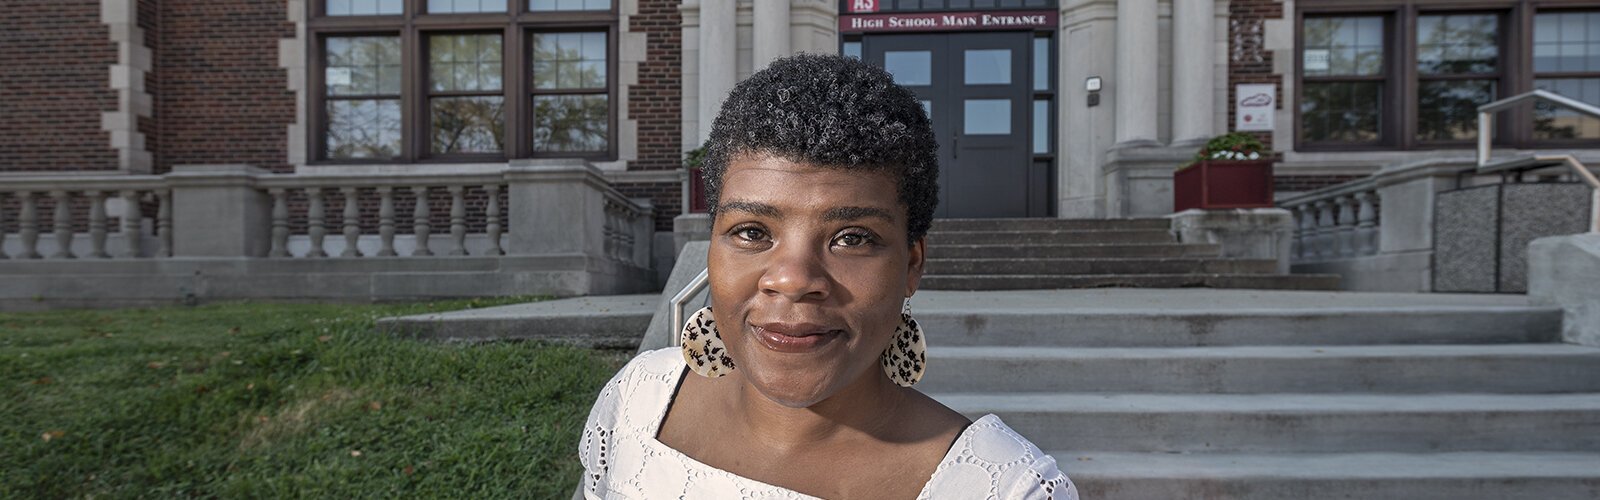 Anissa Lewis grew up in Covington's Eastside neighborhood and returned after getting a degree at Yale.